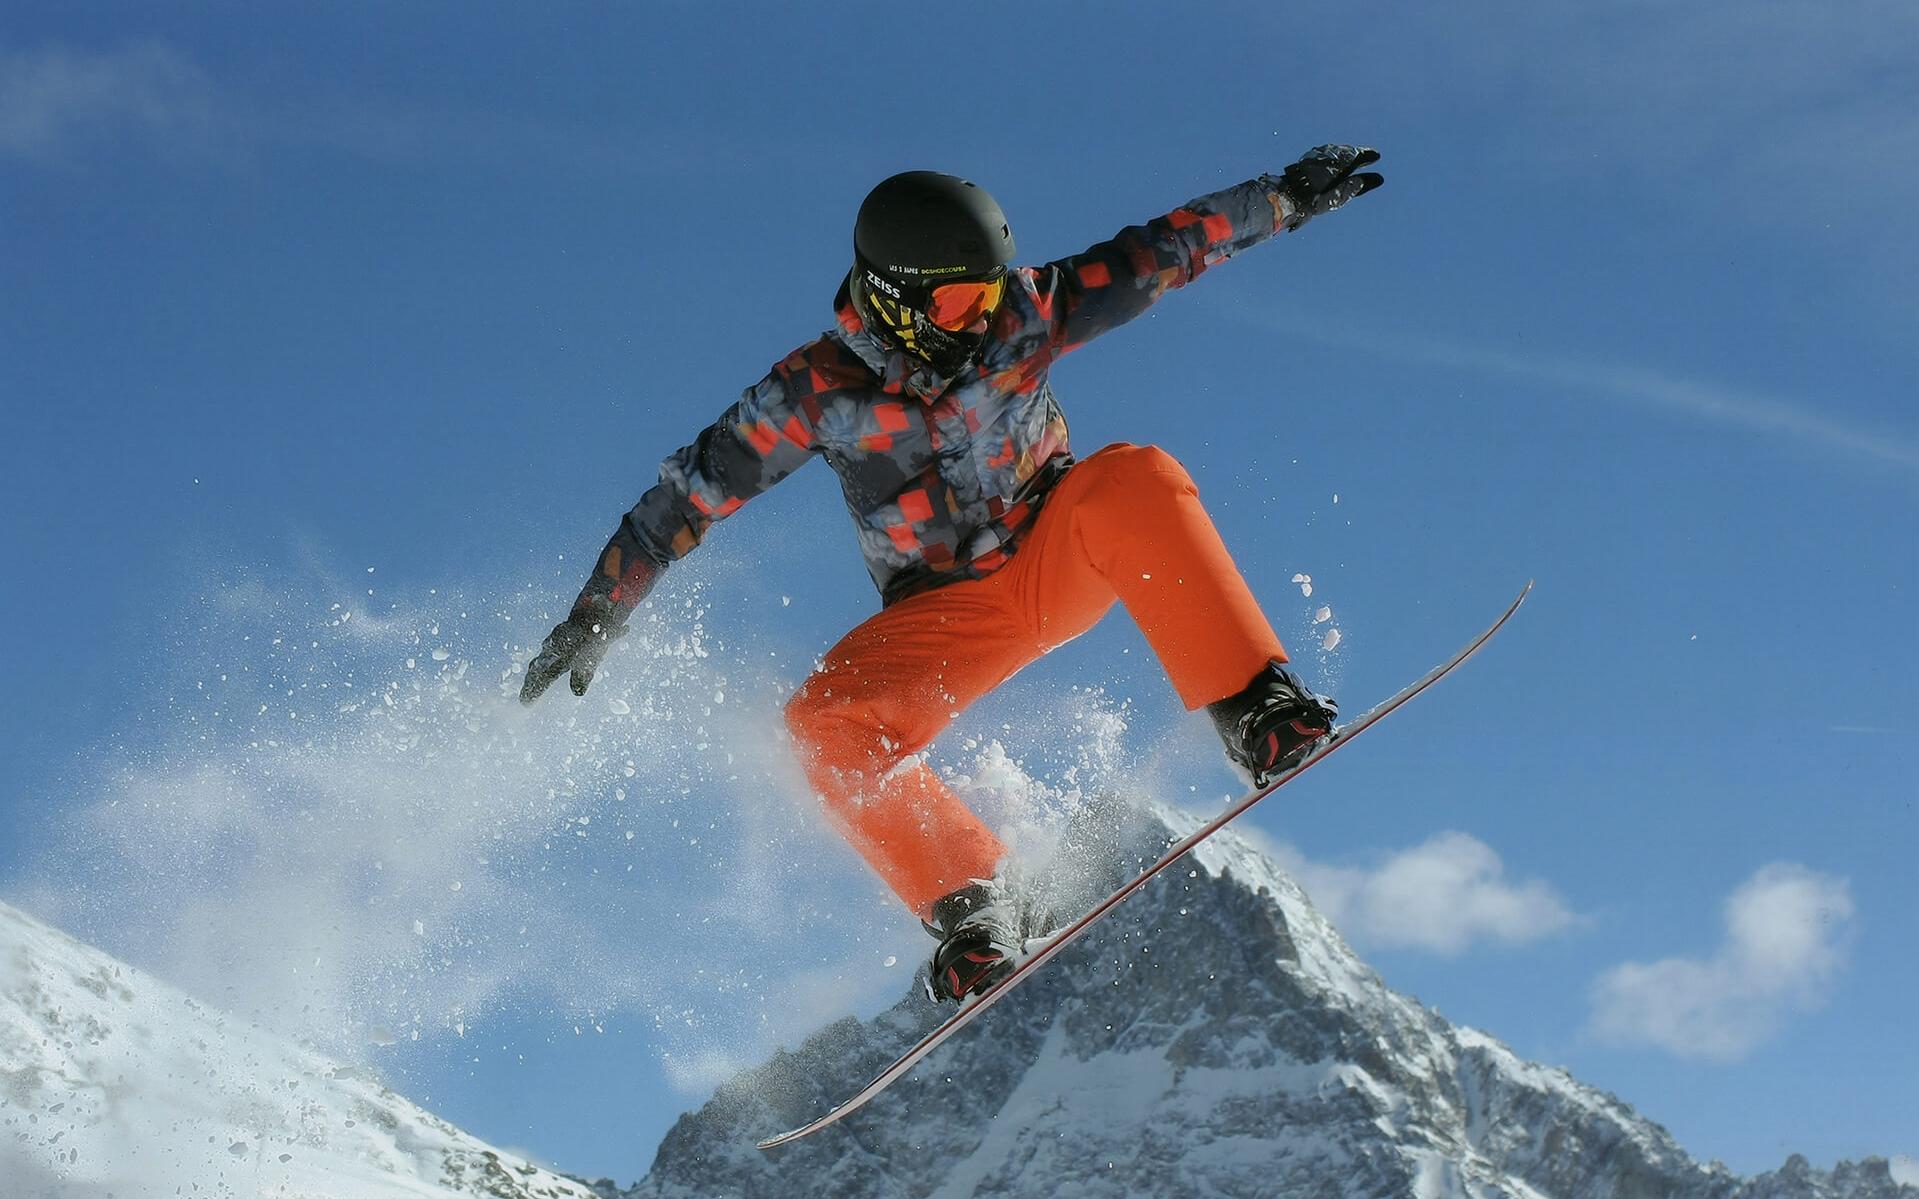 A convenient alternative for skiing and water sports: sports eyewear with your prescription or daily contact lenses.